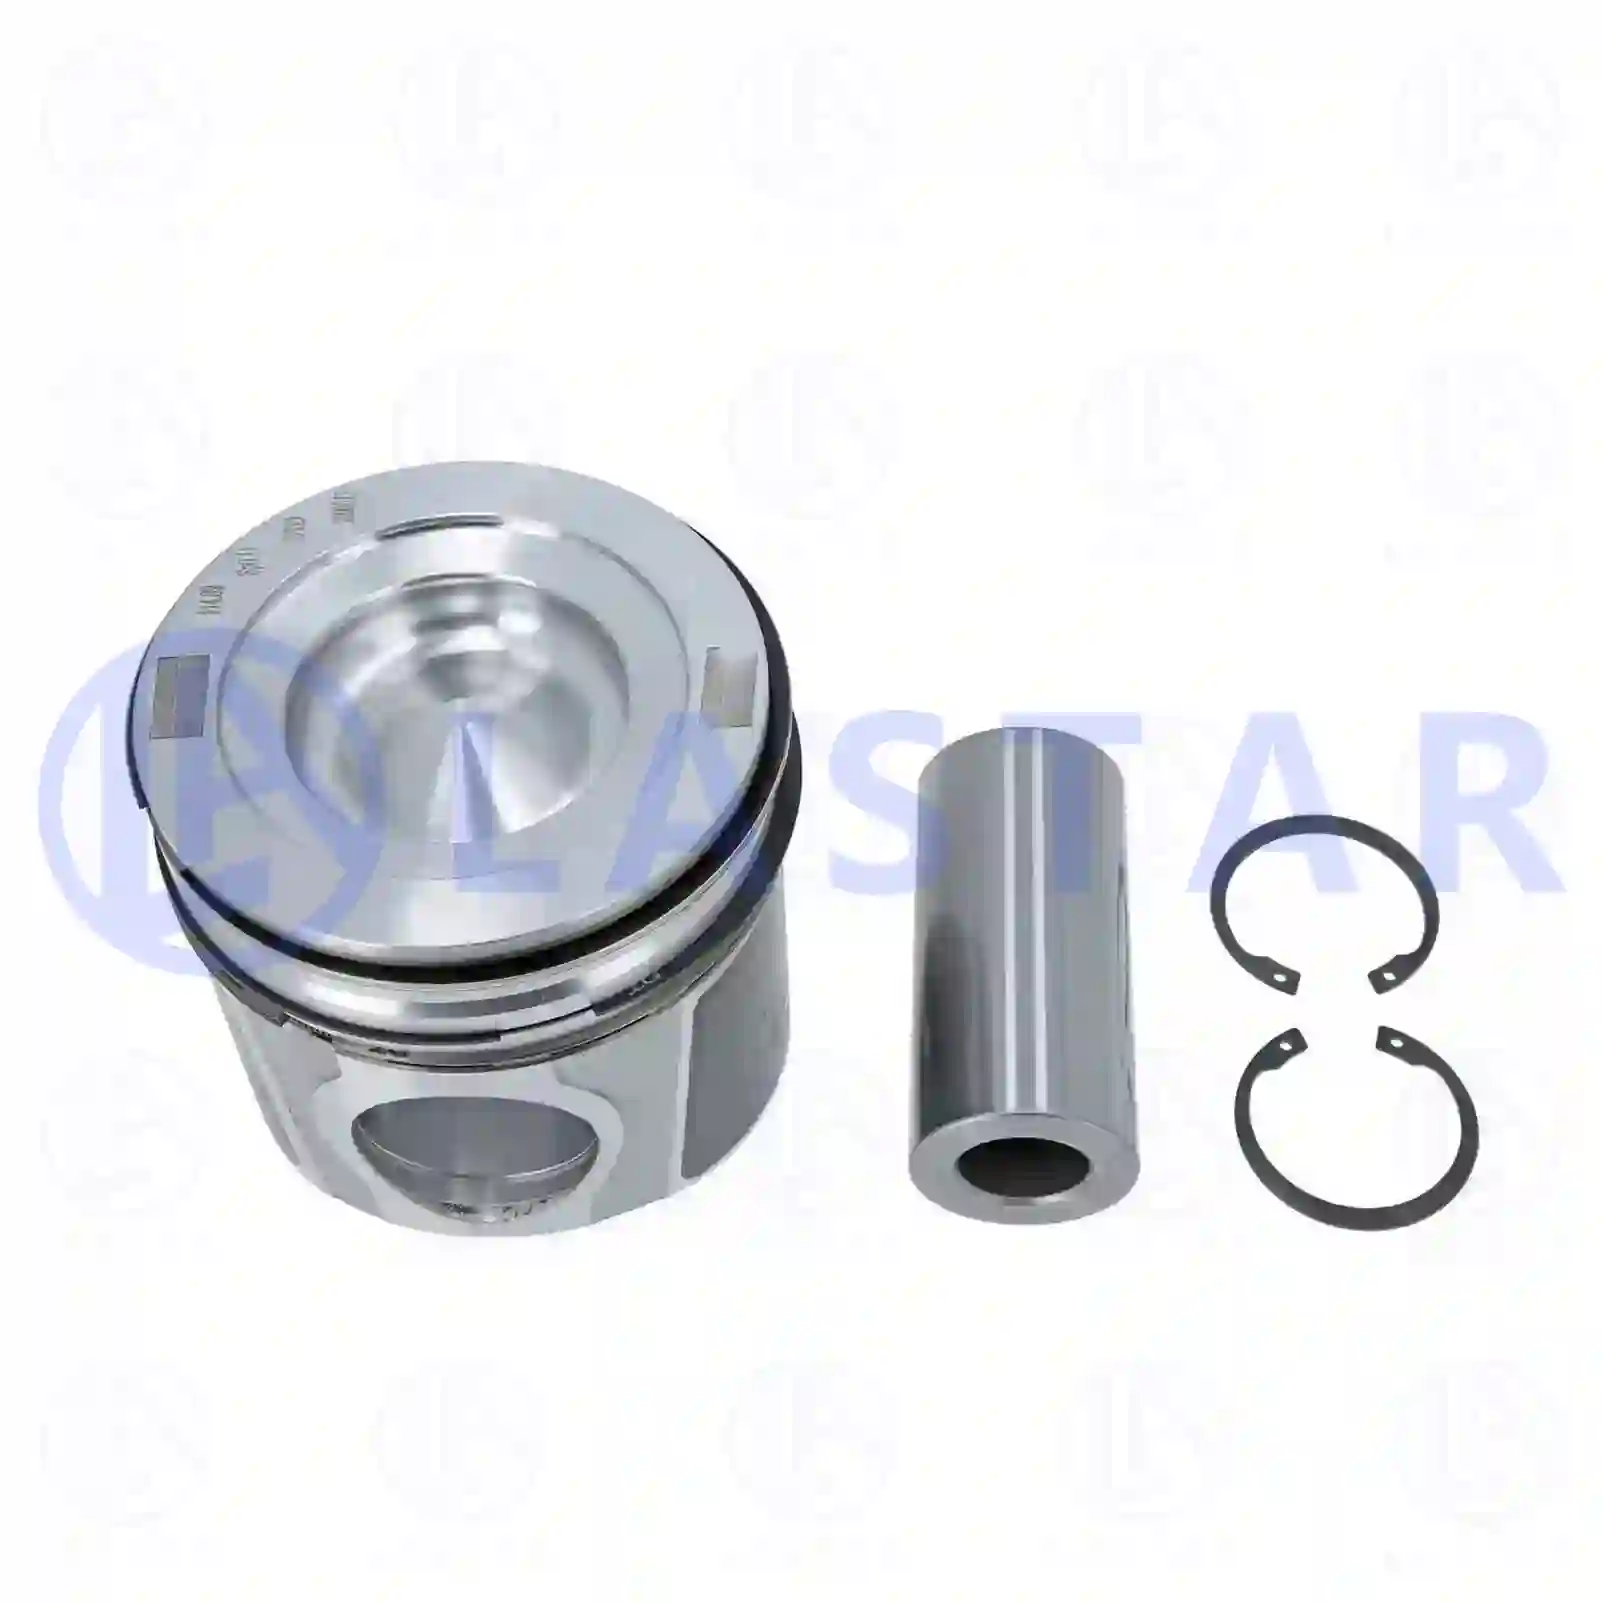 Piston, complete with rings, 77701150, 02995836, 02996414, 02996910, 2995836, 2996414, 2996910, 500055960 ||  77701150 Lastar Spare Part | Truck Spare Parts, Auotomotive Spare Parts Piston, complete with rings, 77701150, 02995836, 02996414, 02996910, 2995836, 2996414, 2996910, 500055960 ||  77701150 Lastar Spare Part | Truck Spare Parts, Auotomotive Spare Parts